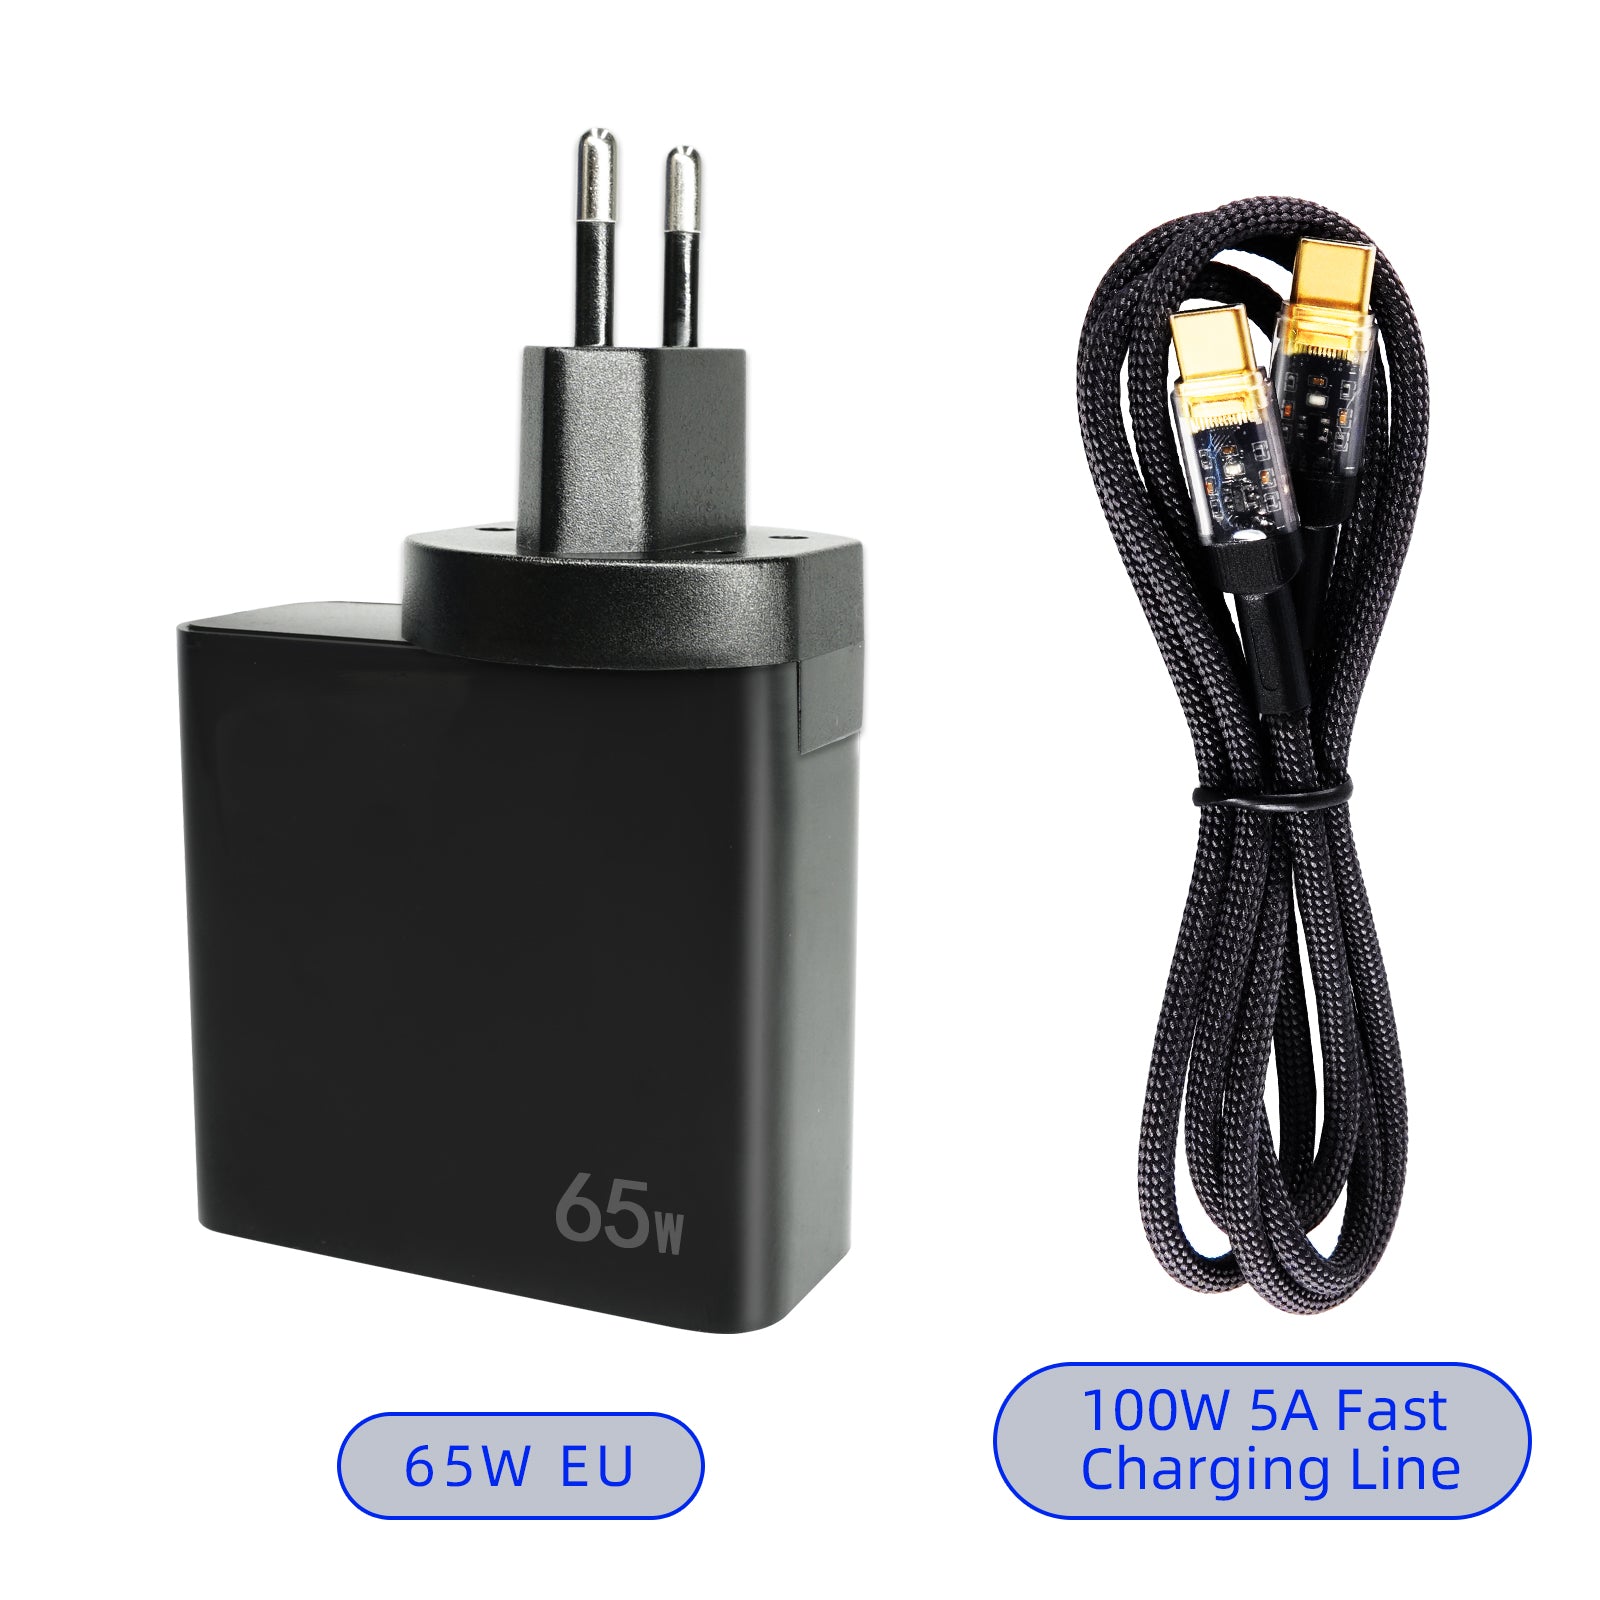 Dual port folding fast charging source PD65W US/EU/UK/AU with transparent indicator light PD100W 5A data cable